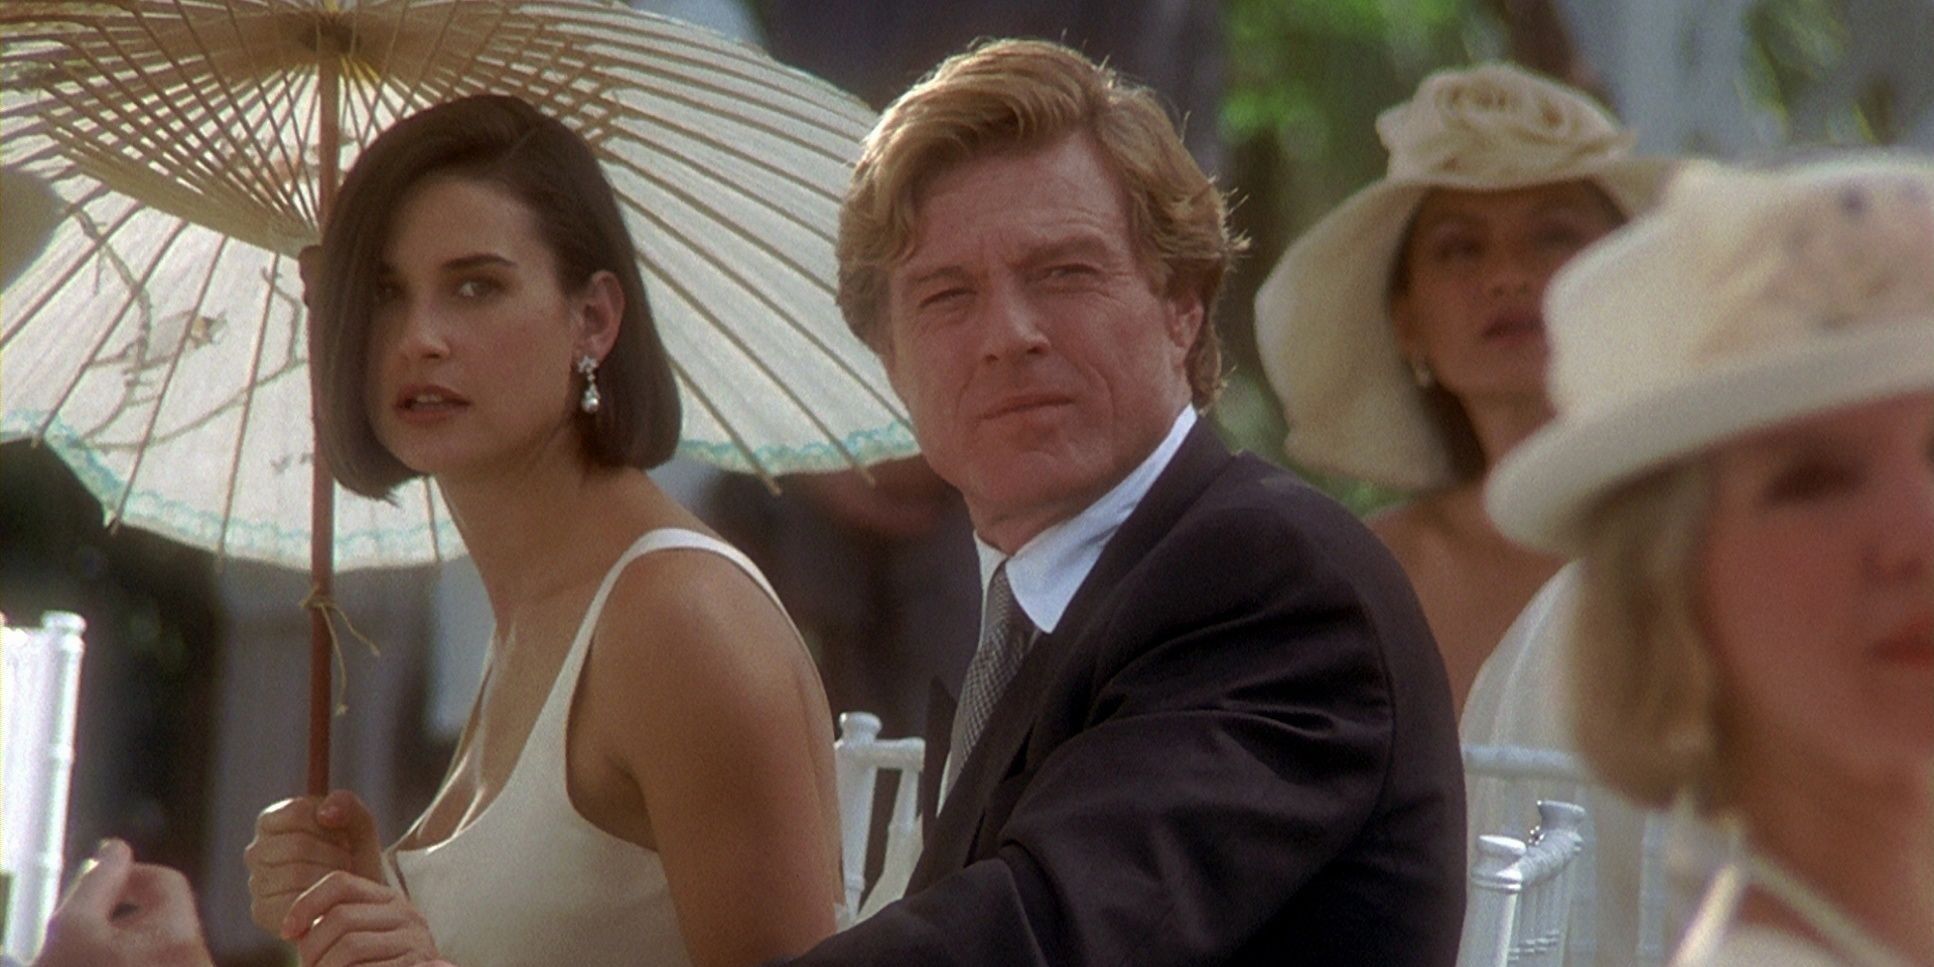 John (Robert Redford) and Diana (Demi Moore) holding an unbrella at a dinner table in Indecent Proposal